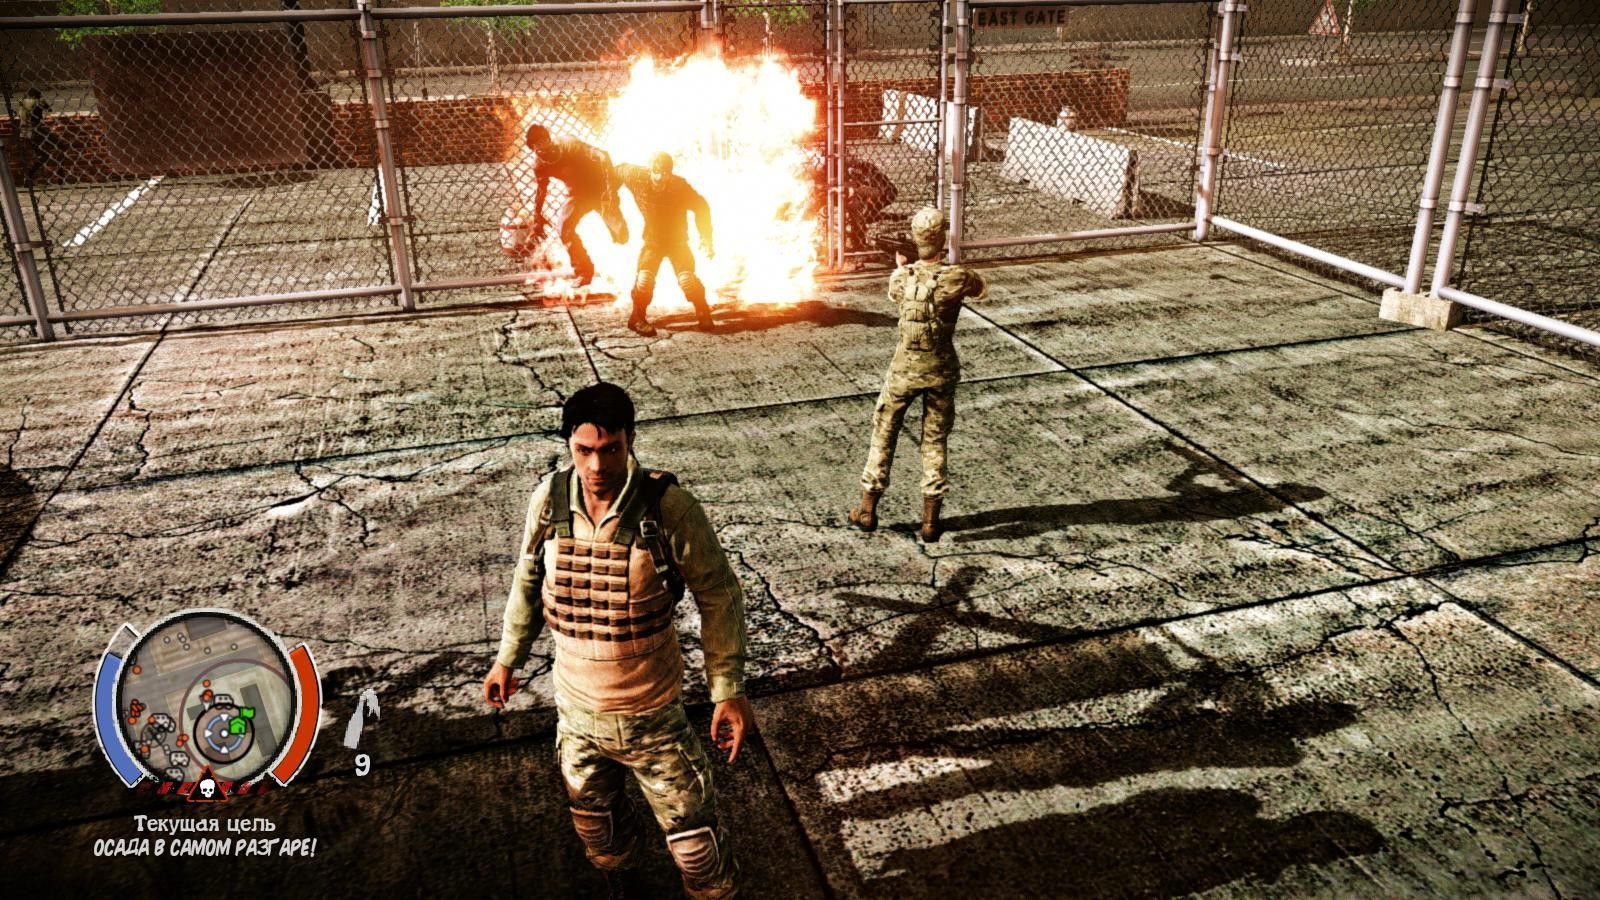 Игры дадите 18. State of Decay 3. State of Decay 2013. State of Decay (2013-2018). [R.G. Mechanics] State of Decay.